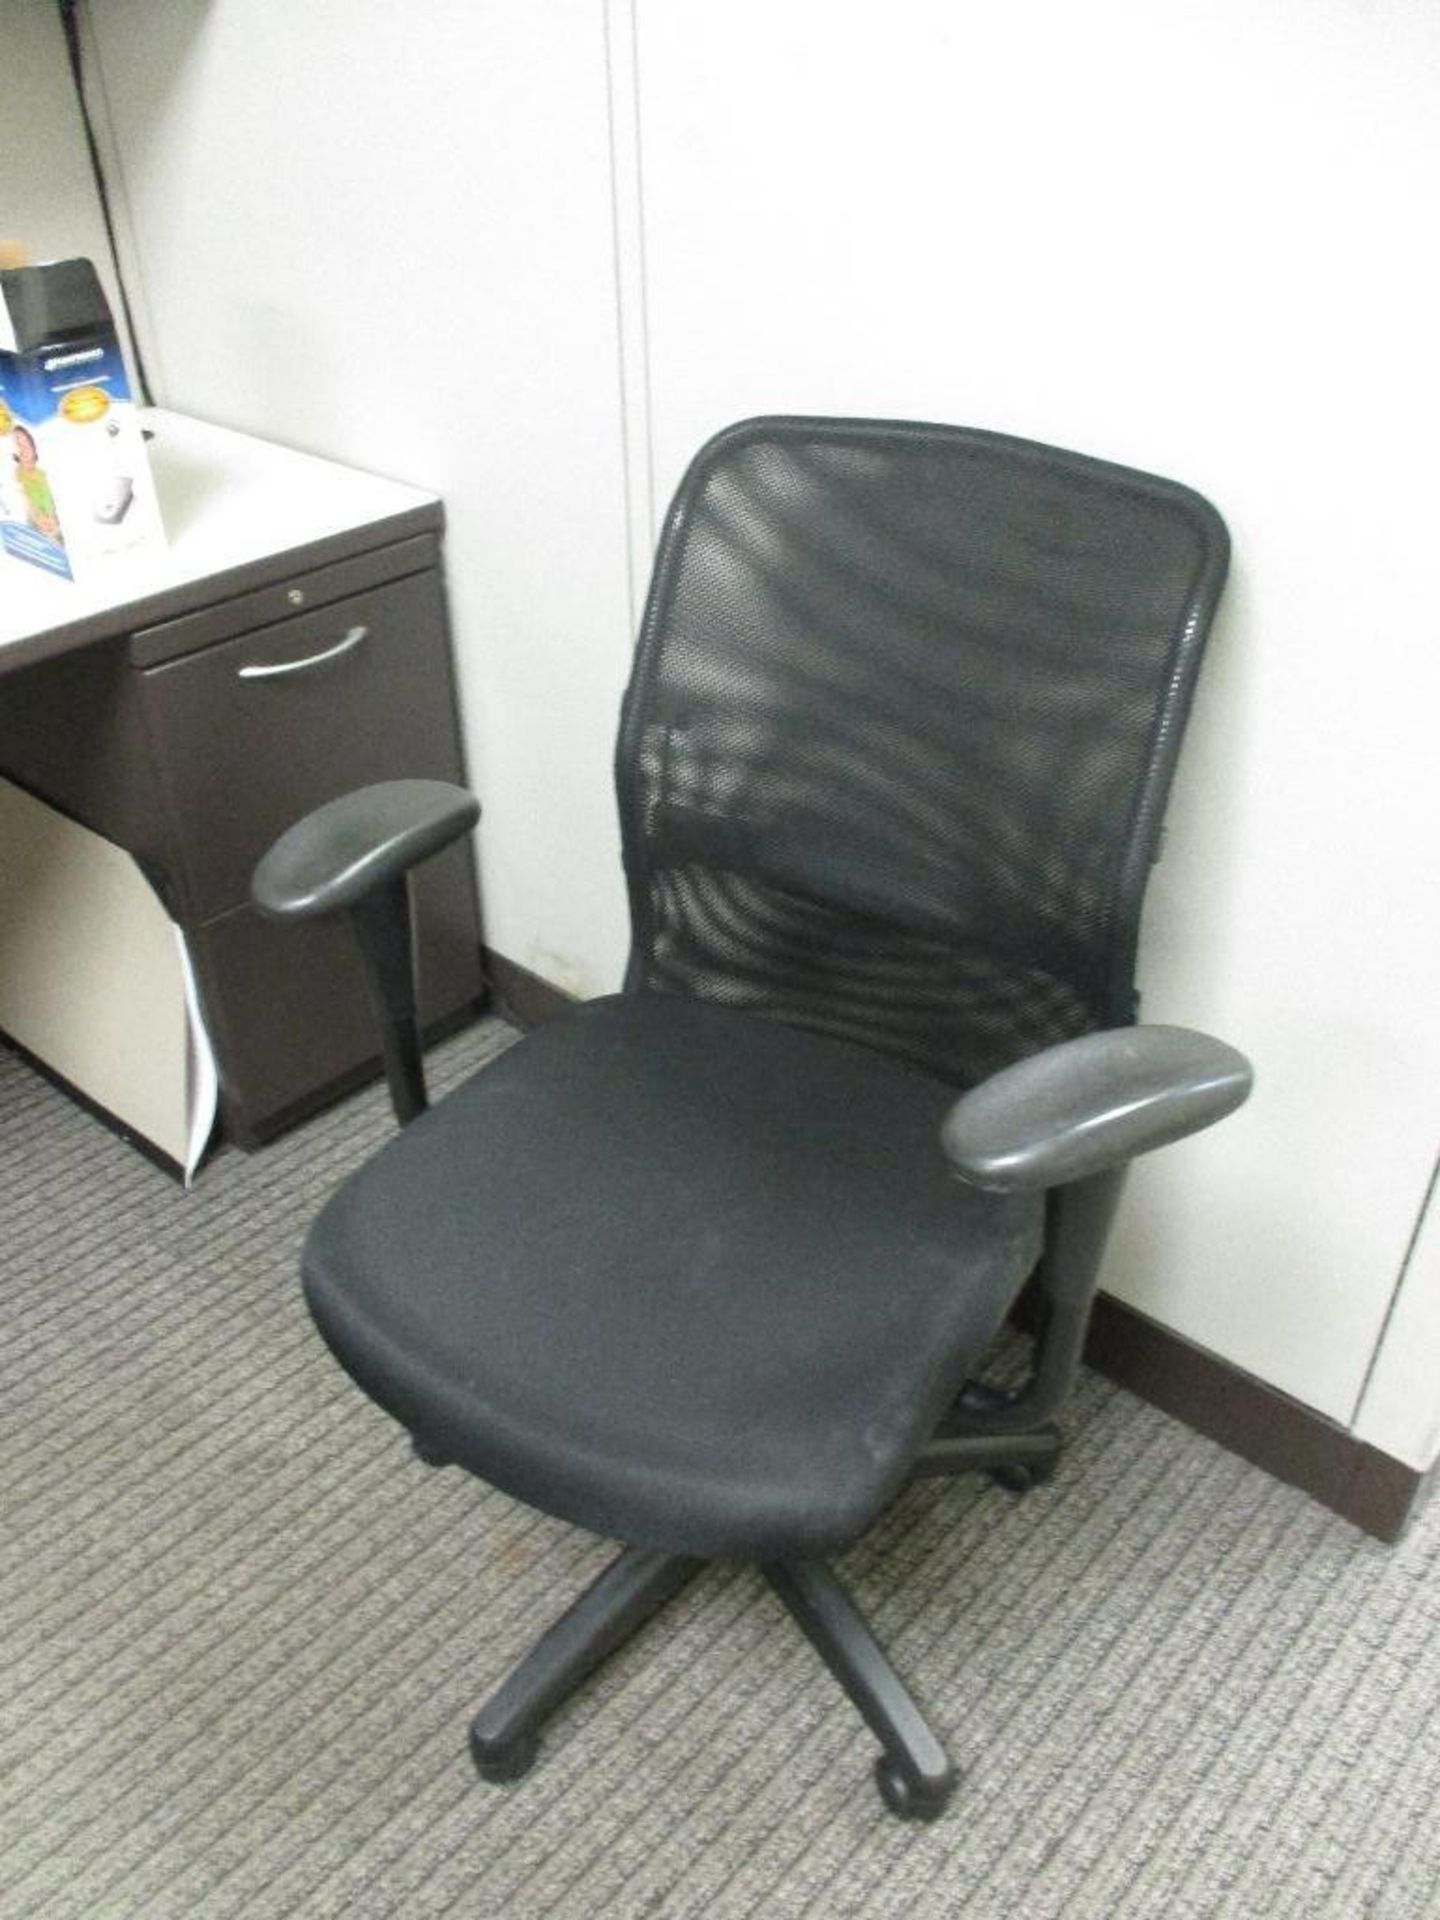 5 Rolling Office chairs - Image 5 of 6